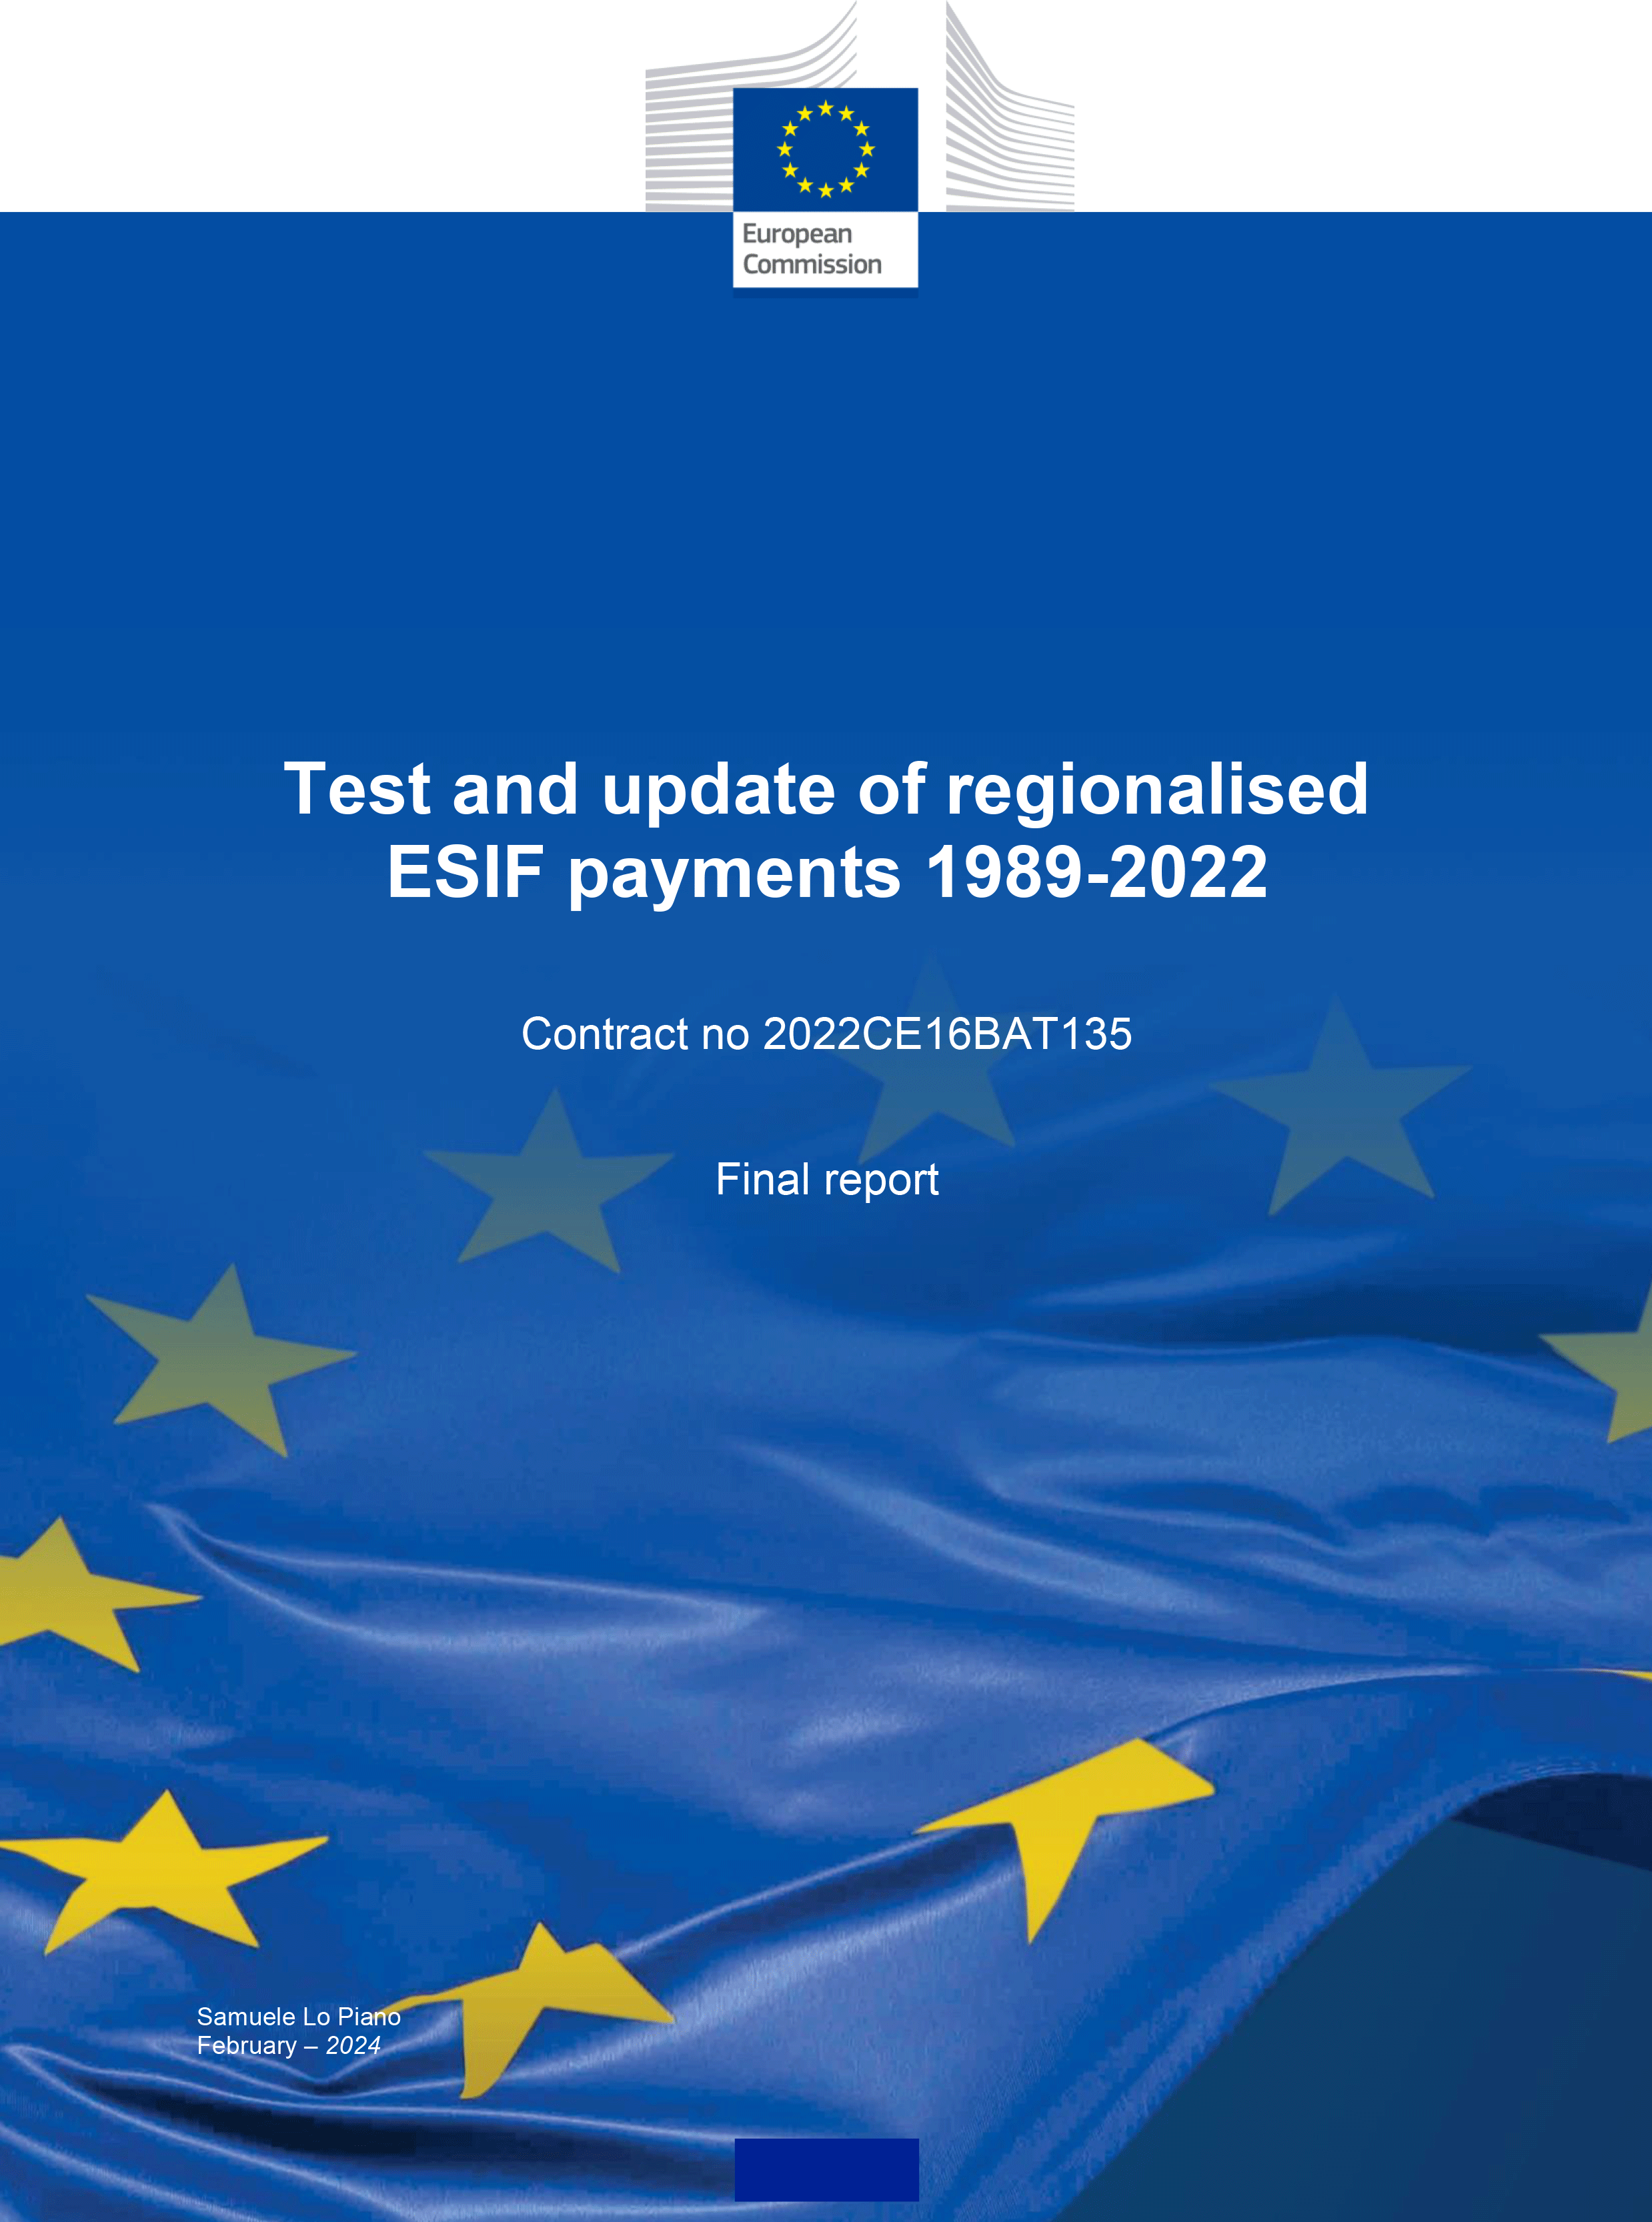 Test and update of regionalised ESIF payments 1989-2022